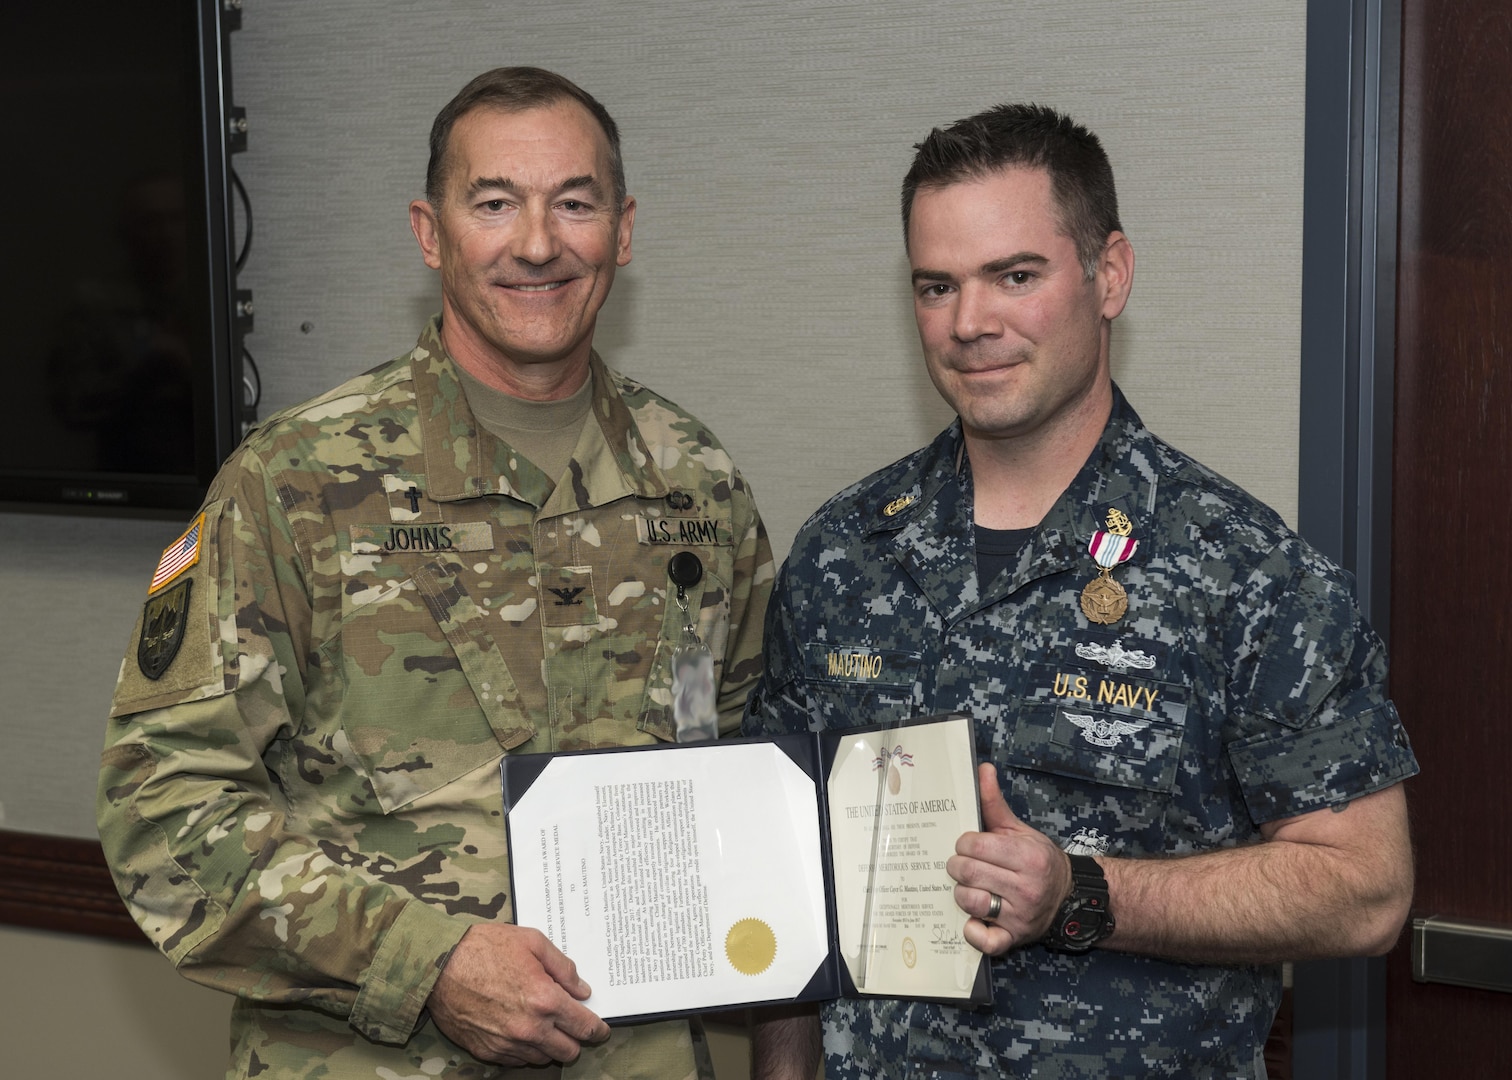 COL Jay Johns III, NORAD and USNORTHCOM command chaplain, presents the Defense Meritorious Service Medal to Chief Petty Officer Cayce Mautino, U.S. Navy. The NORAD and USNORTHCOM Office of the Command Chaplain at held a religious affairs workshop titled  "Embracing Complexity-Navigating Uncertainty" March 23, 2017. The three-day event focused on strengthening relationships and interoperability with military mission partners. Attendees included the National Guard, National Guard Bureau, the Royal Bahamas Defence Force Command Chaplain, Canadian Armed Forces Chaplain General Representative, NORAD & USNORTHCOM Region, and Component and Subordinate Command Chaplains.
